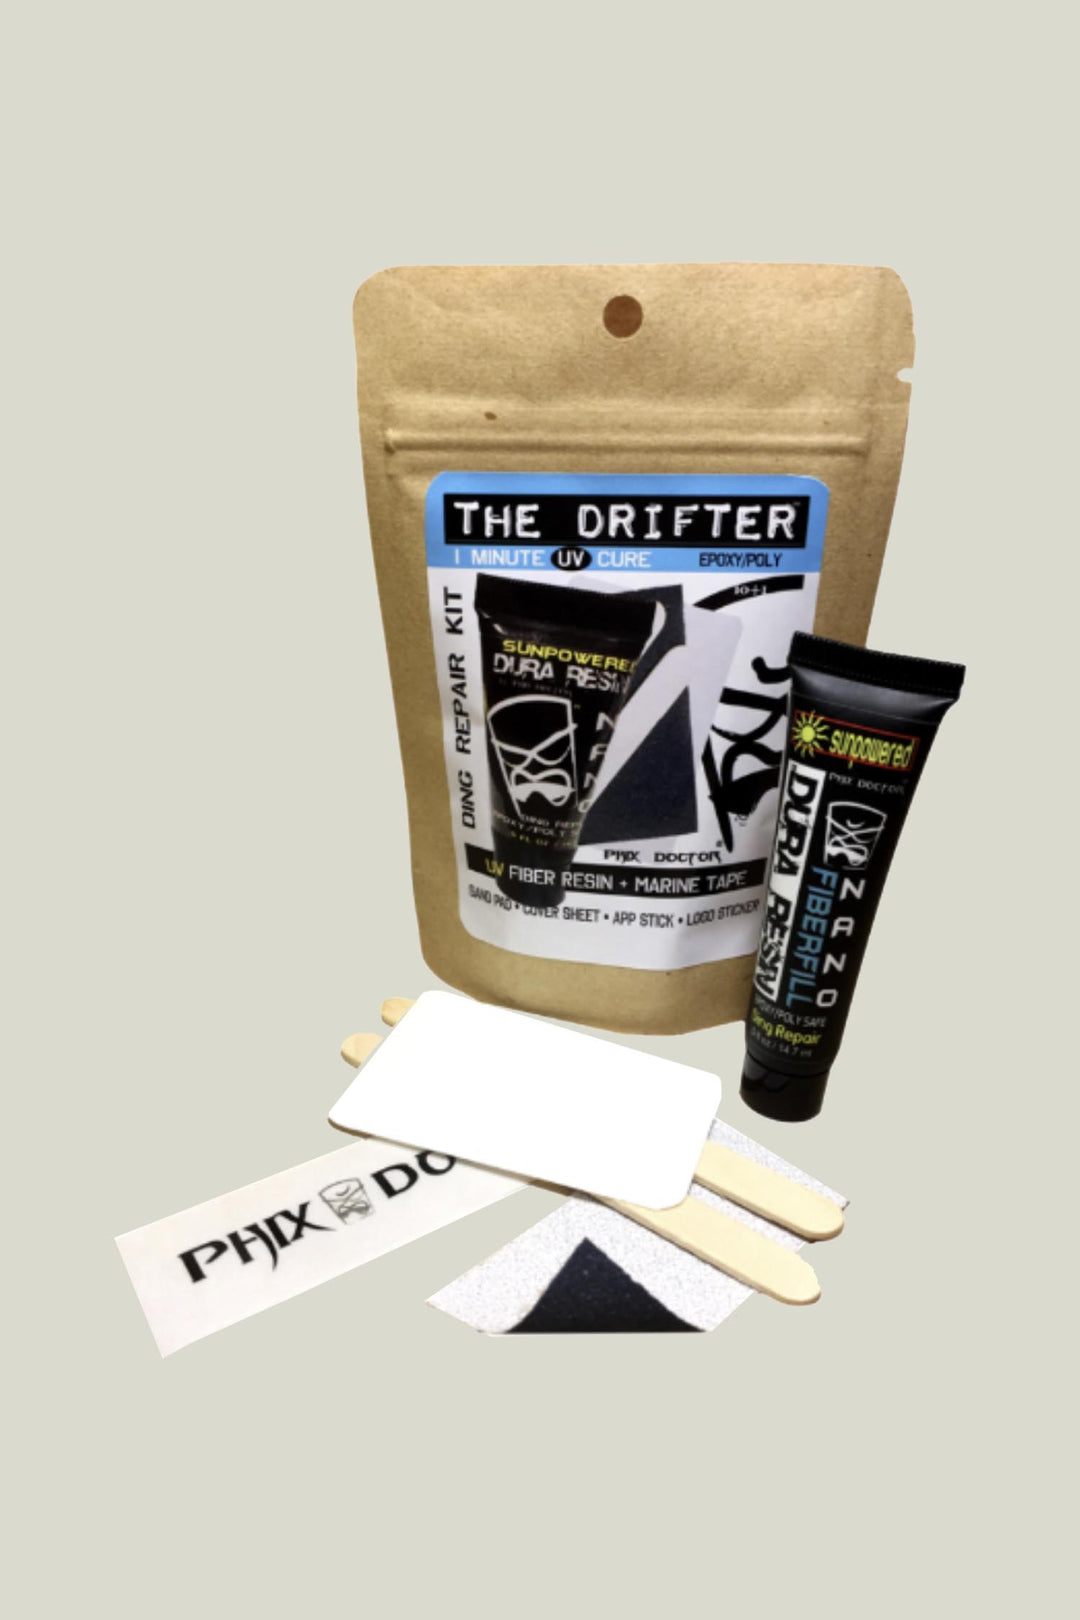 PHIX DOCTOR - THE DRIFTER EPOXY & POLYESTER